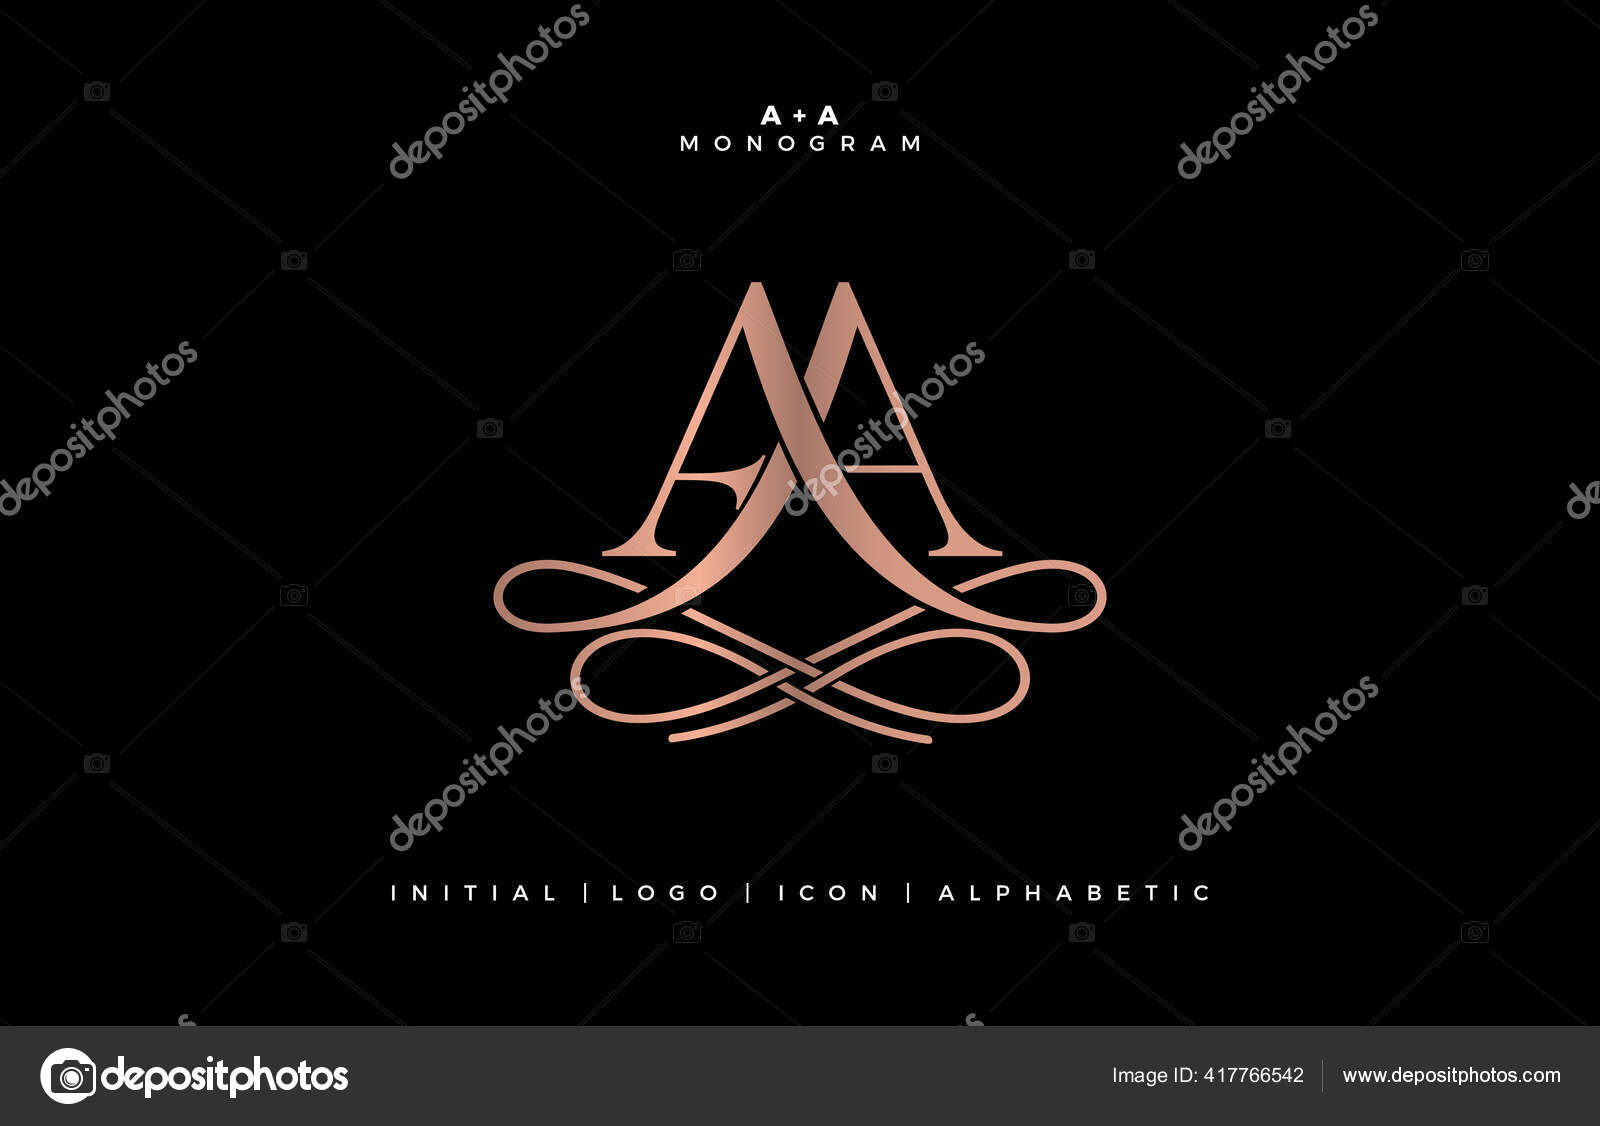 Illustration Of MP Or PM Monogram Classic Style, Initial Wedding